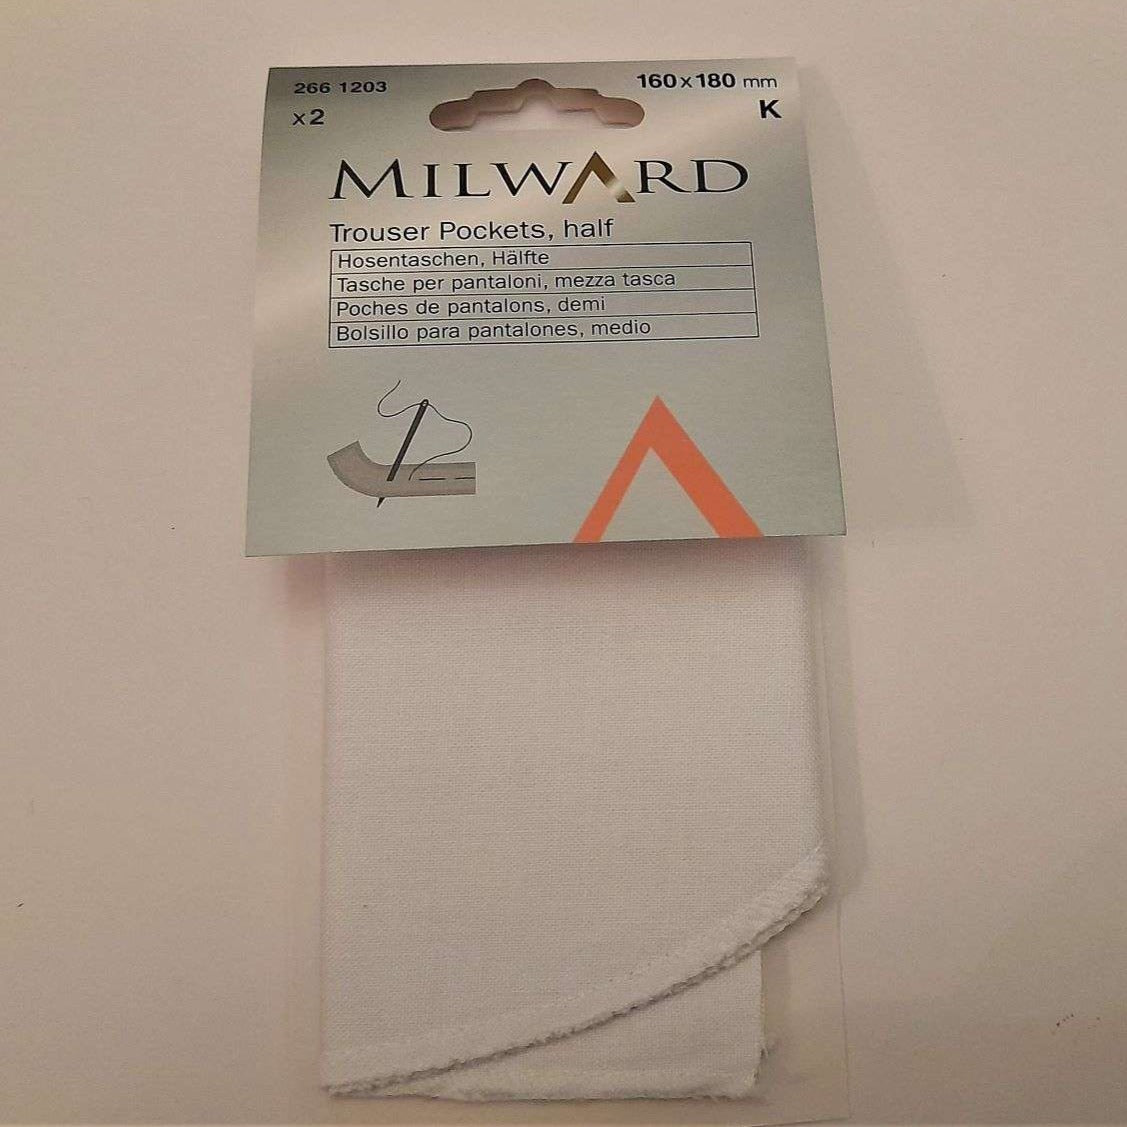 5 cards of one pair of WHITE half trouser pockets sew on cotton fabric Milward Brand size 16cm x 18cm clearance